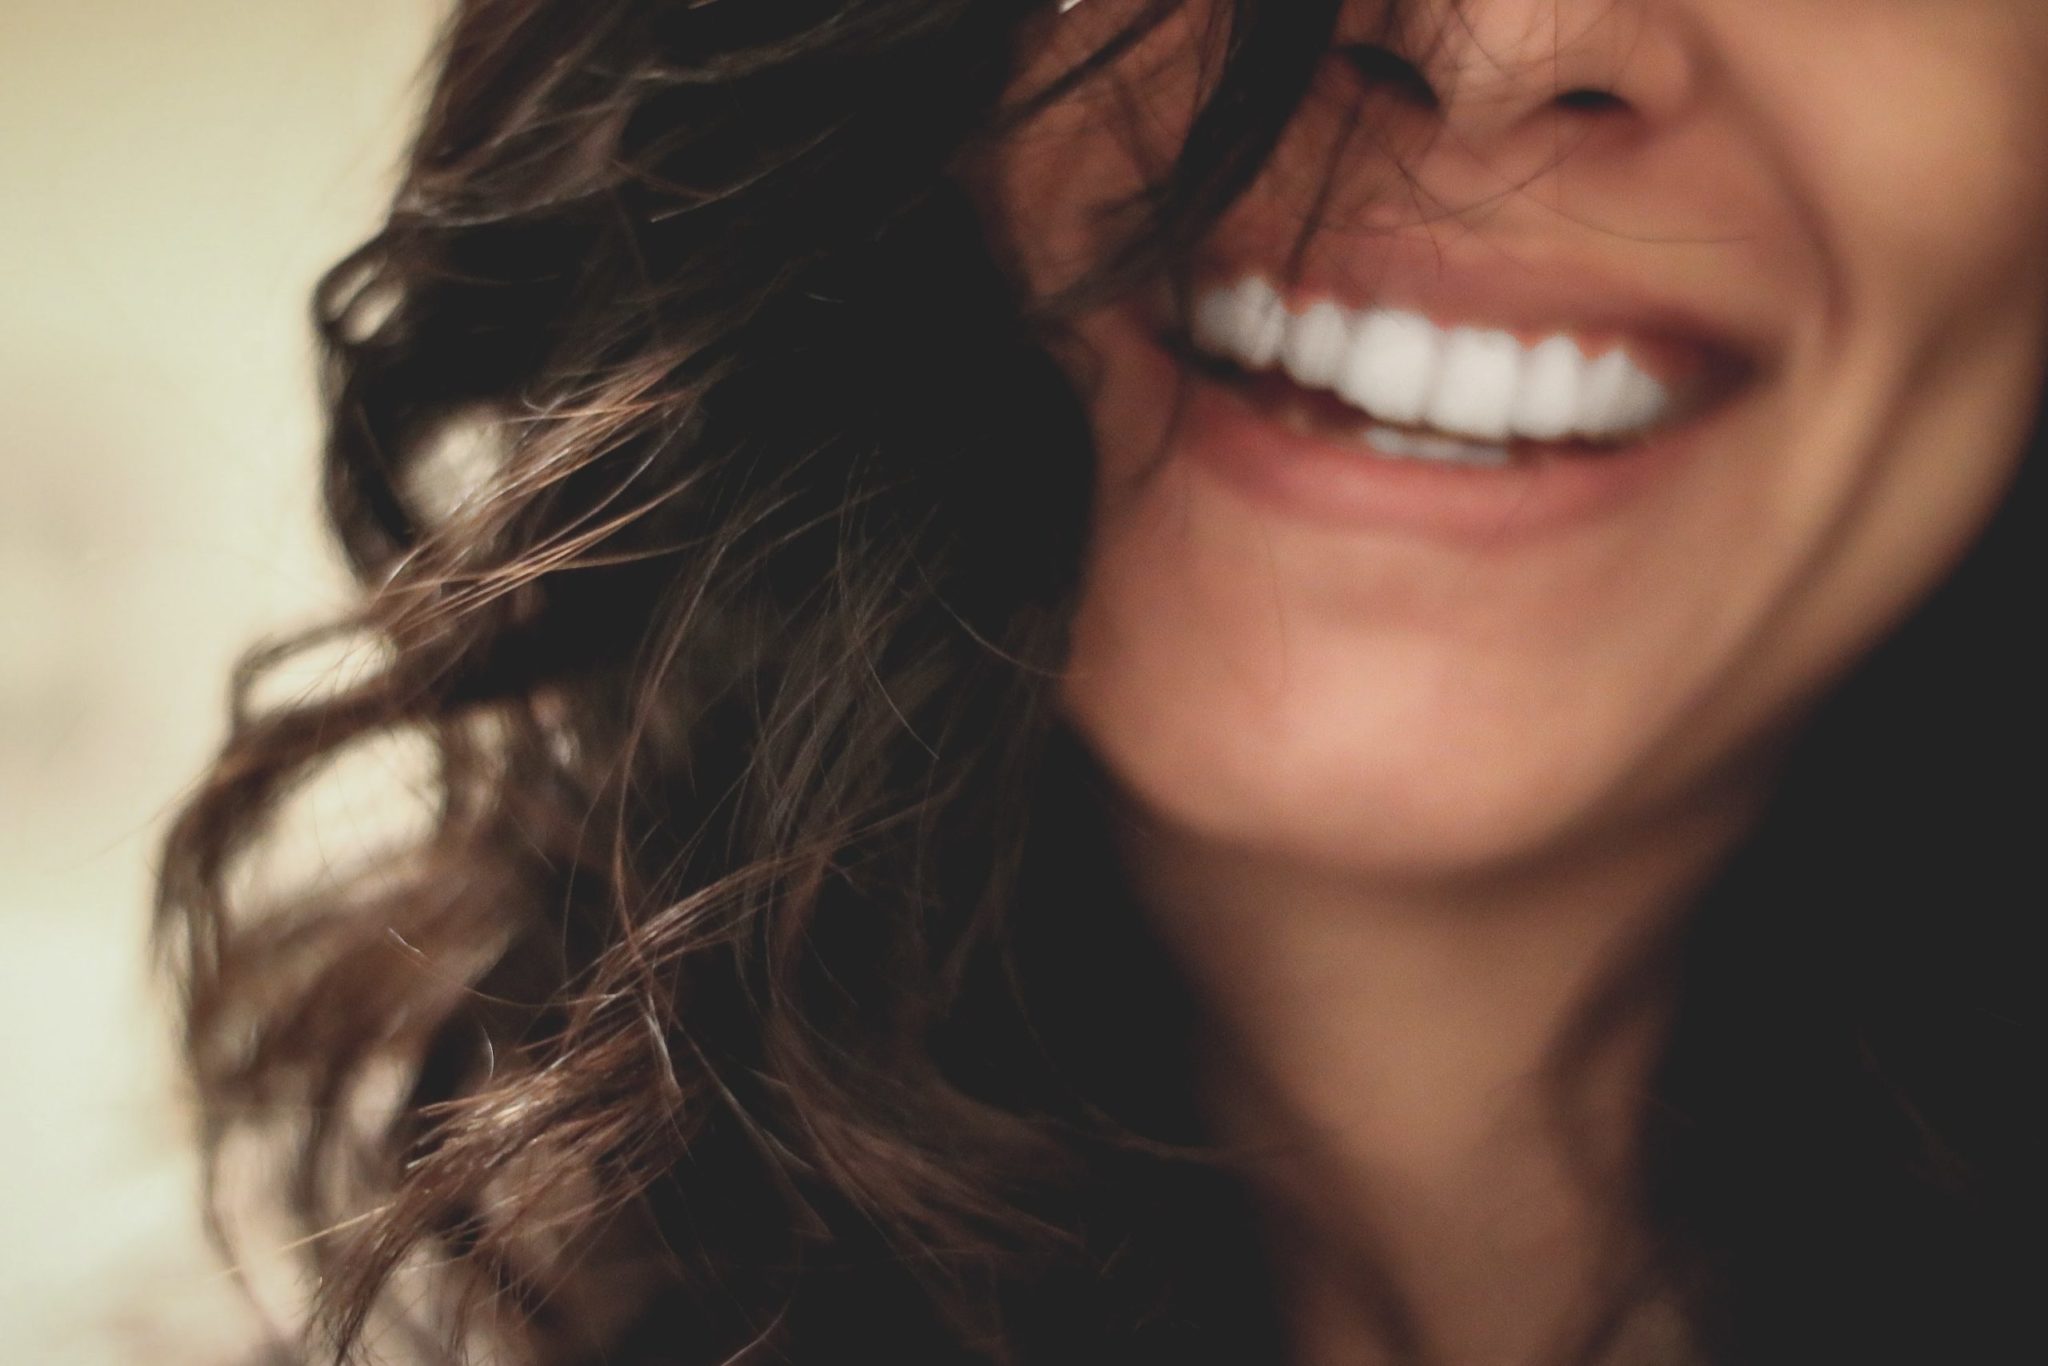 A young woman smiling and revealing perfect teeth